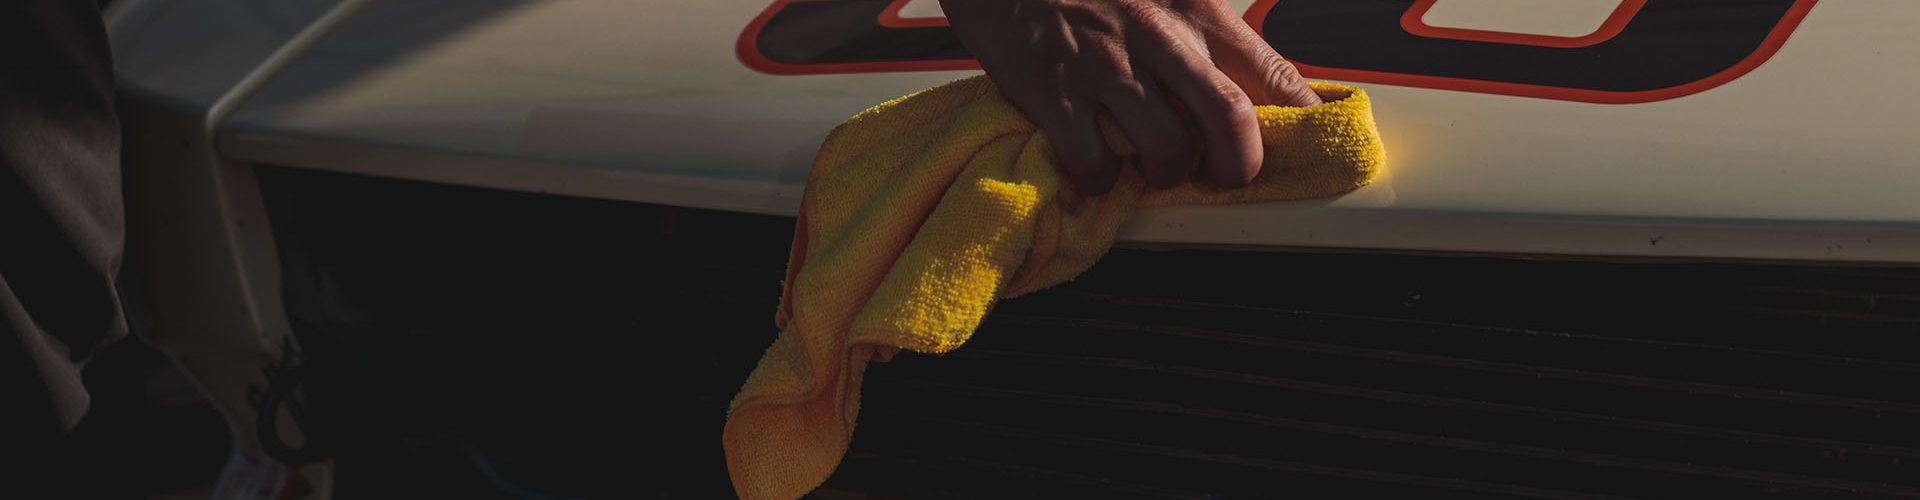 Beautify your car with Woodlands Hand Car Wash